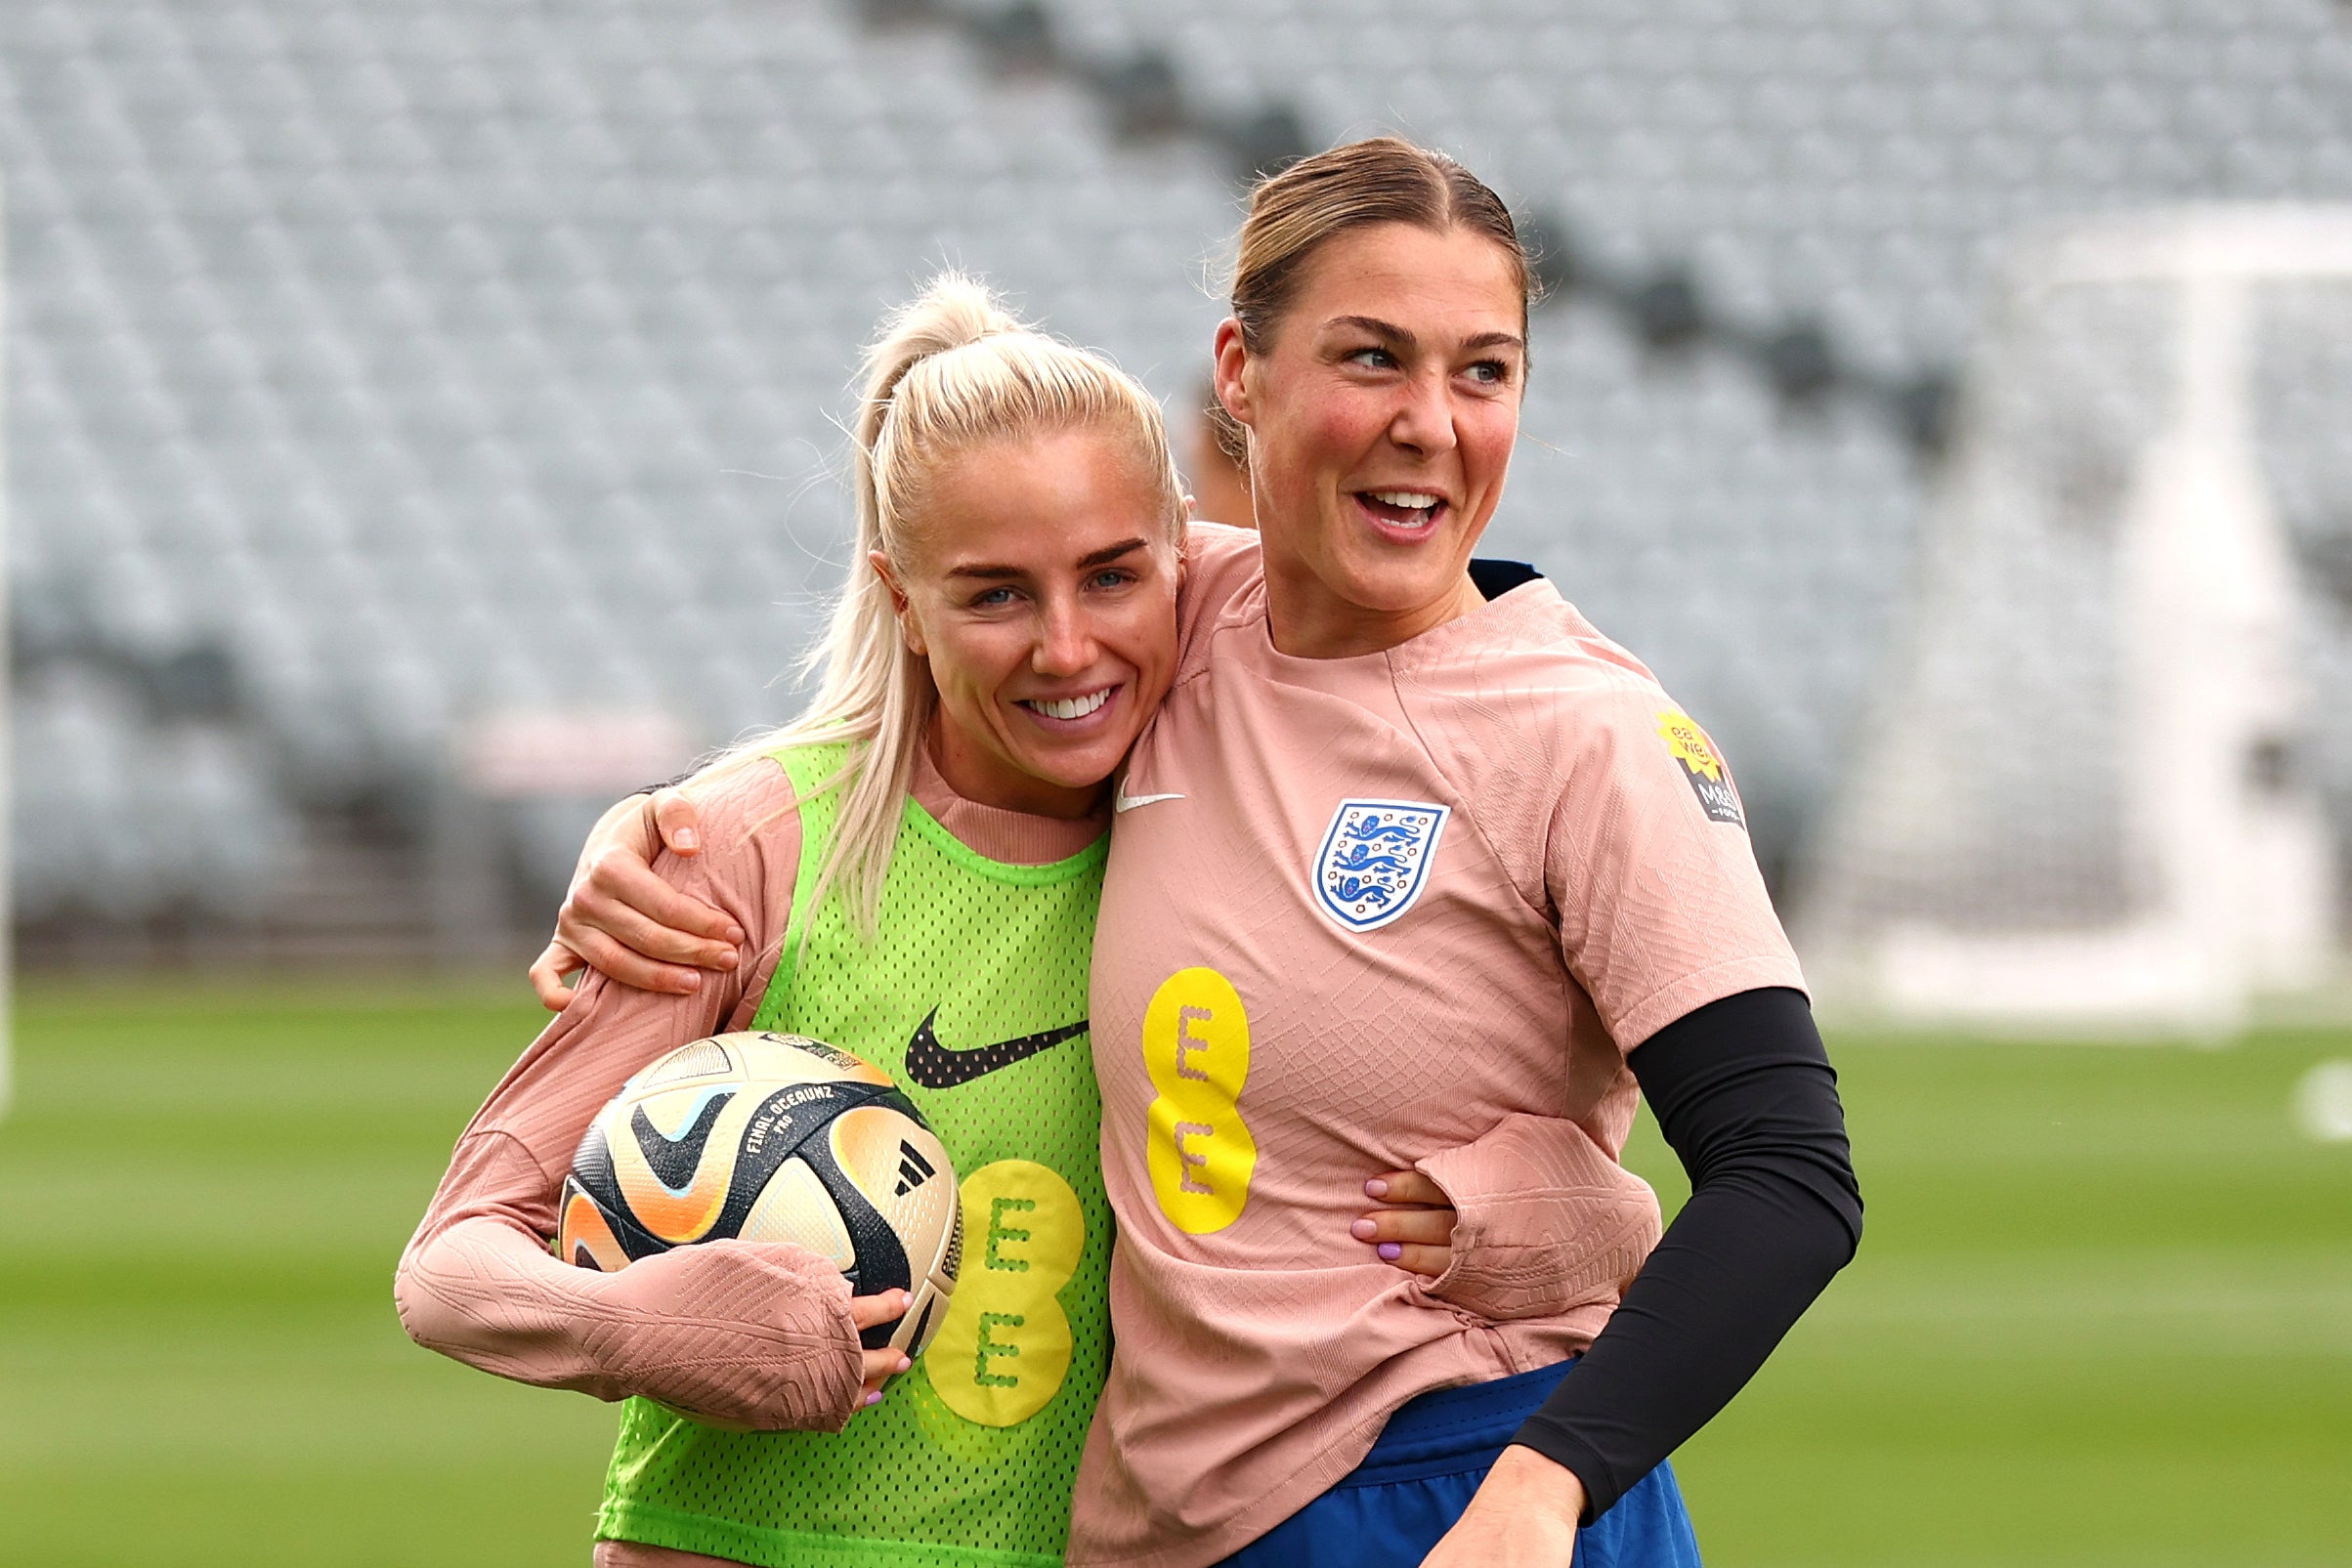 The Lionesses have created a unique culture and environment to help prepare for each Women’s World Cup match